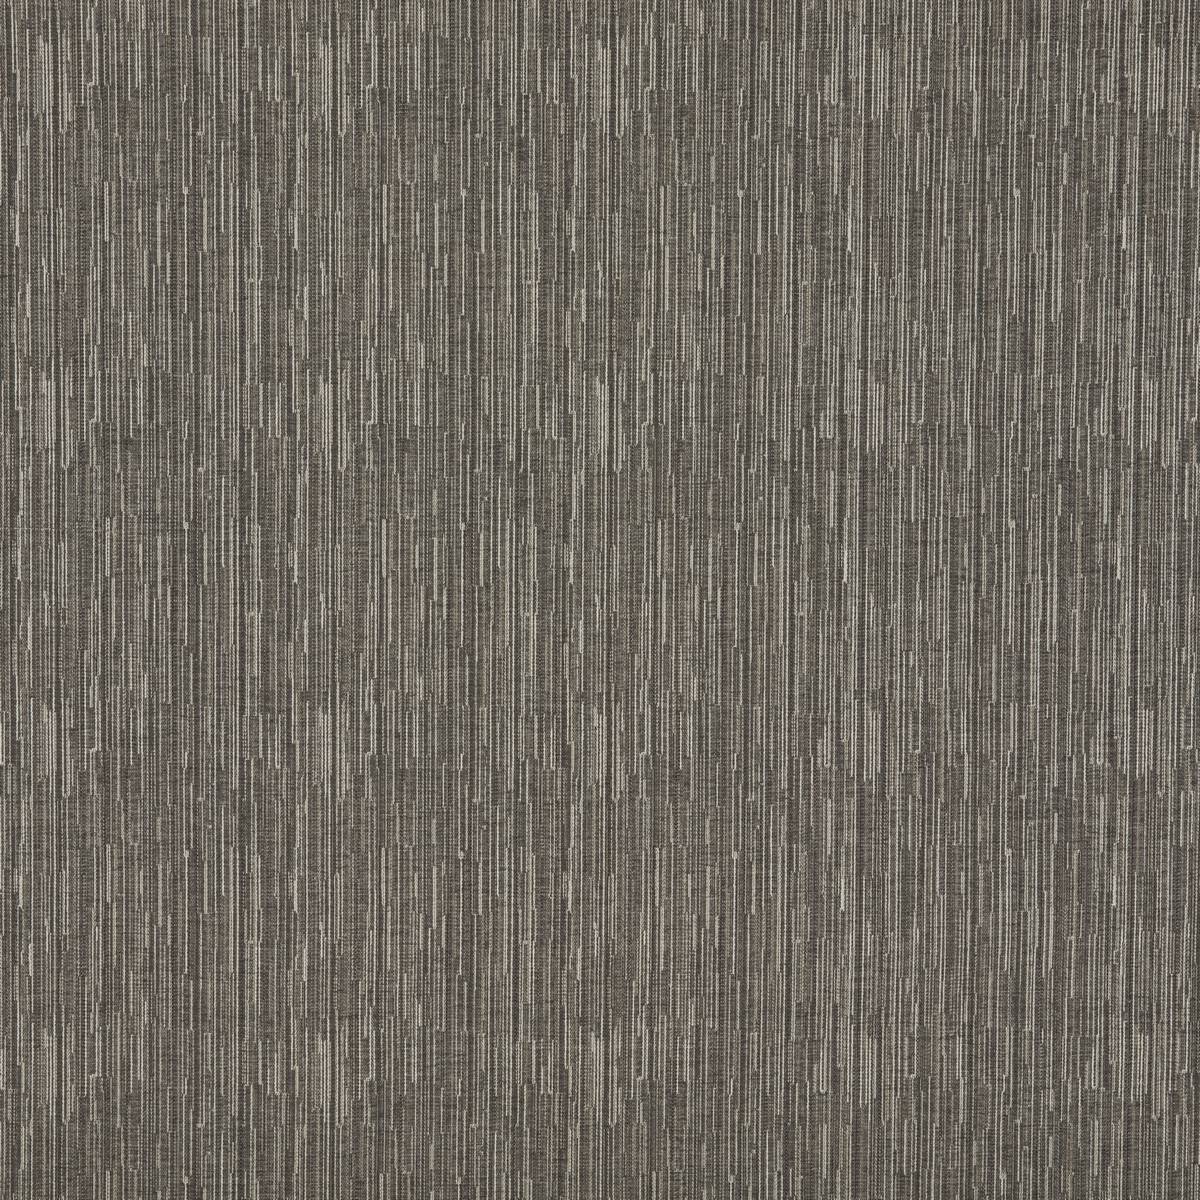 Umbra Charcoal Fabric by iLiv